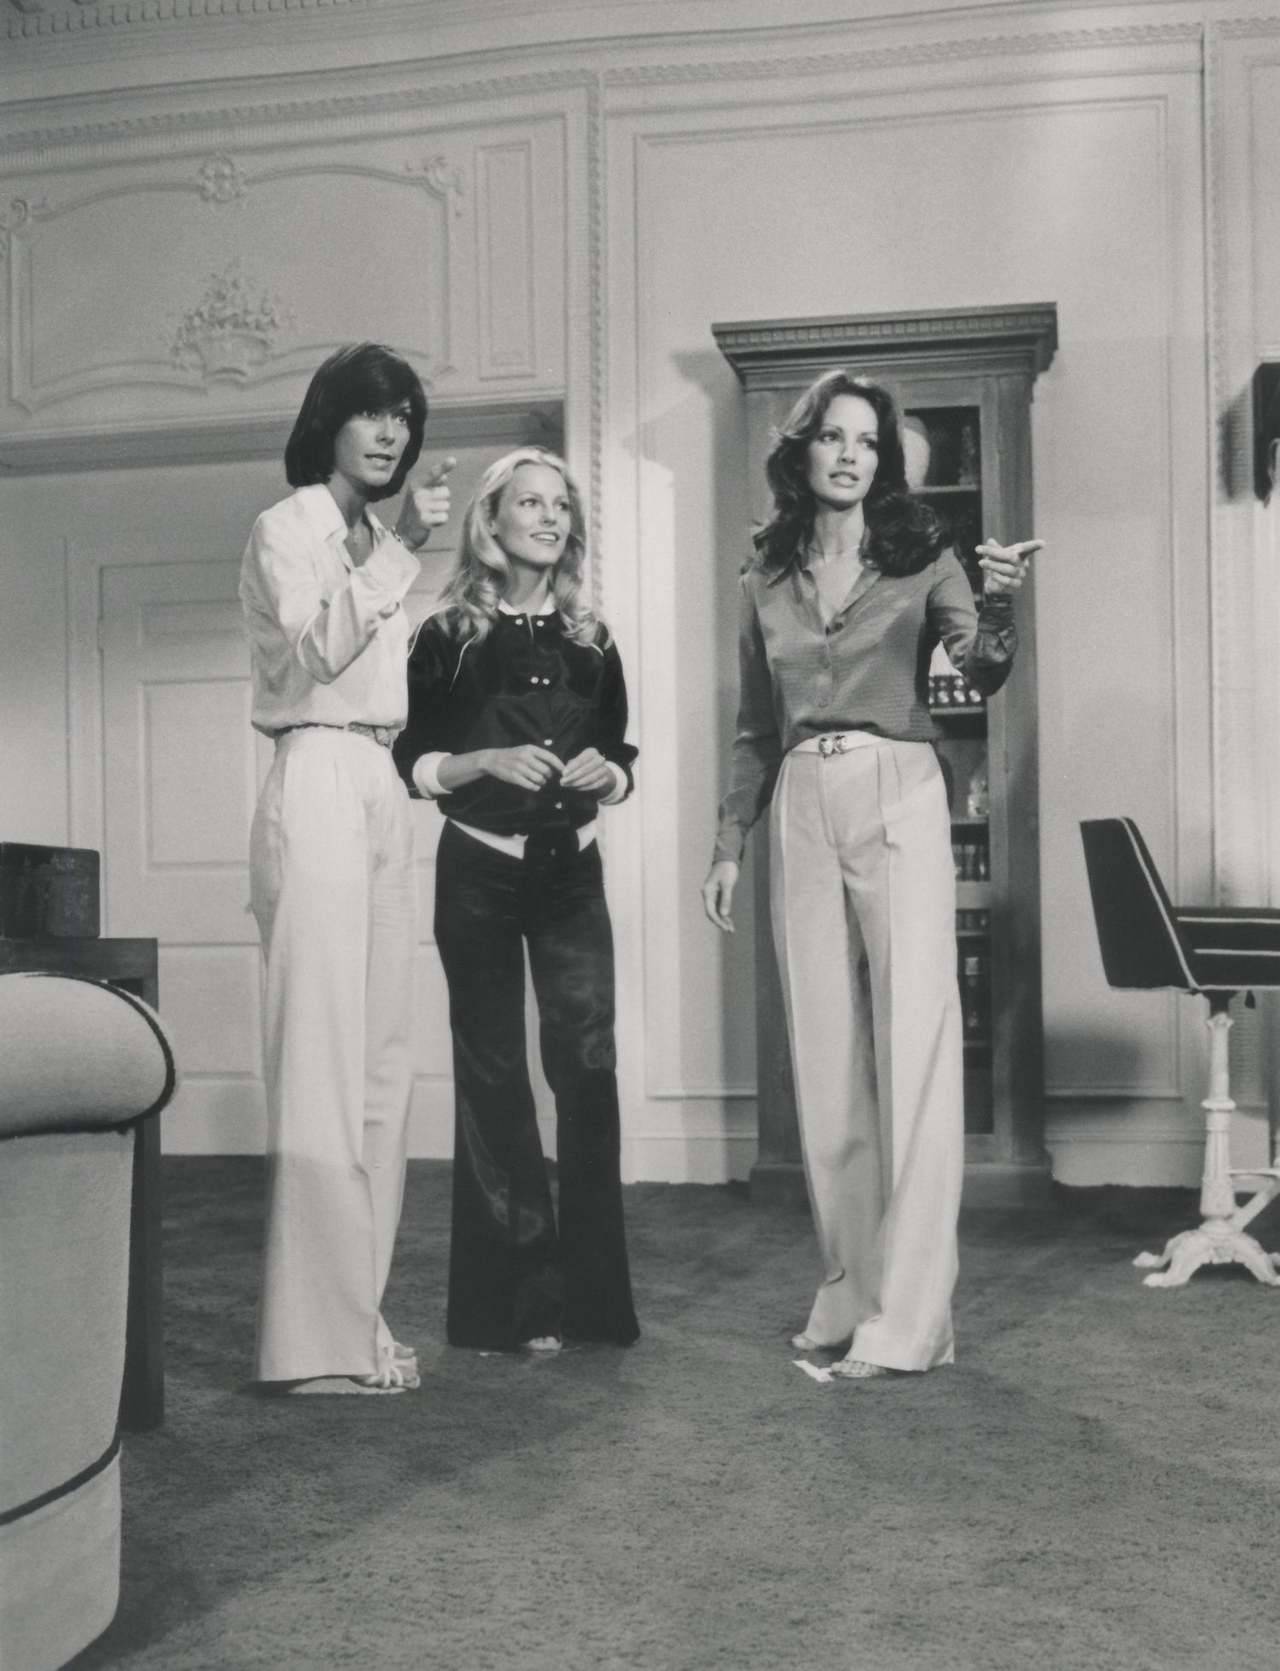 #2461,JACLYN SMITH,kate jackson,CHERYL LADD,charlie's angels,11X17 POSTER PHOTO